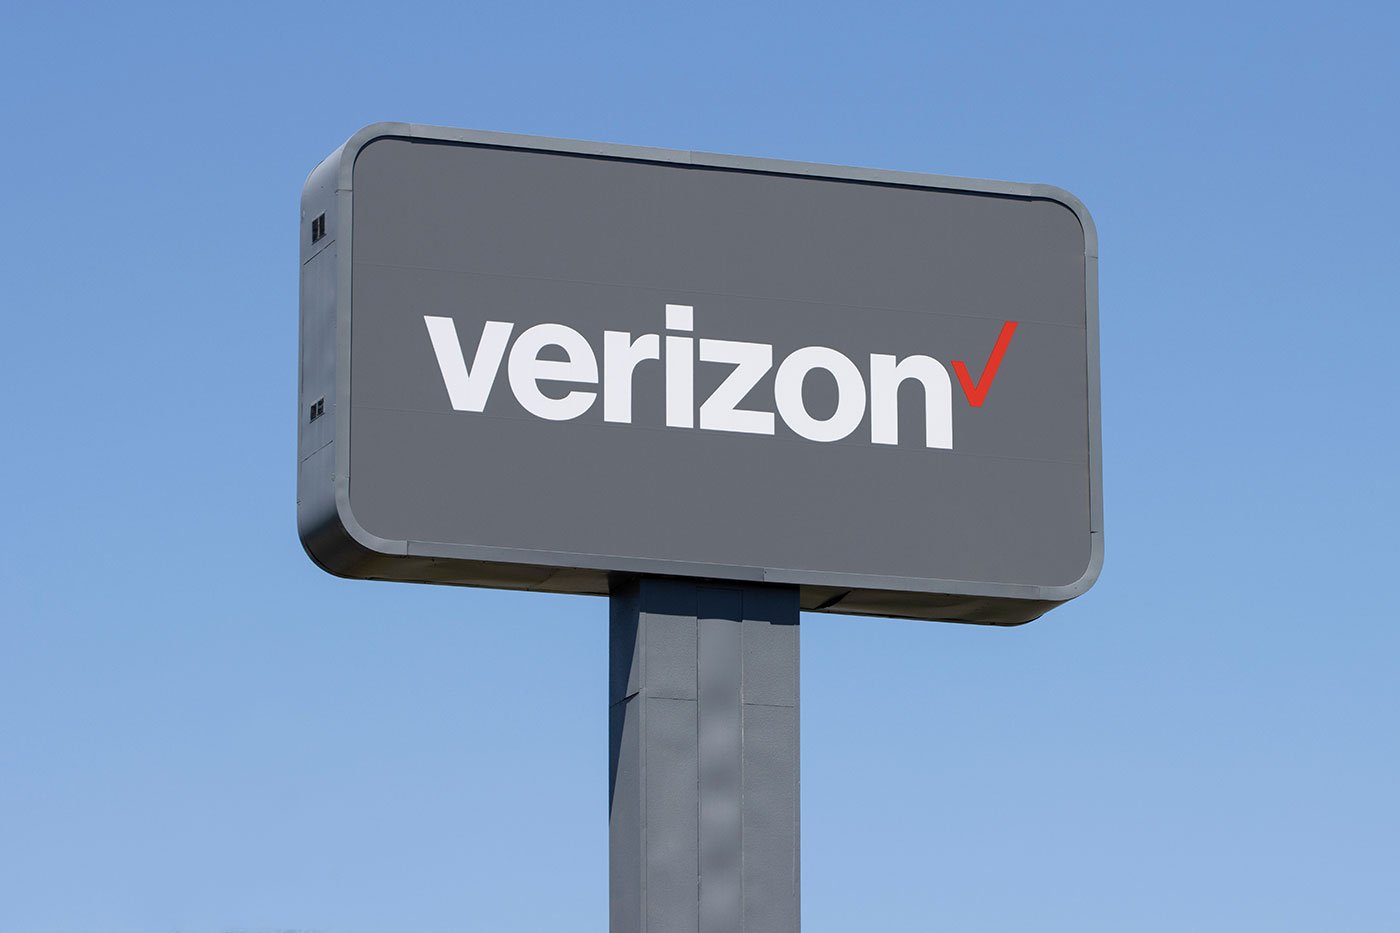 Verizon joins T-Mobile and AT&T by offering a truly unlimited mobile plan